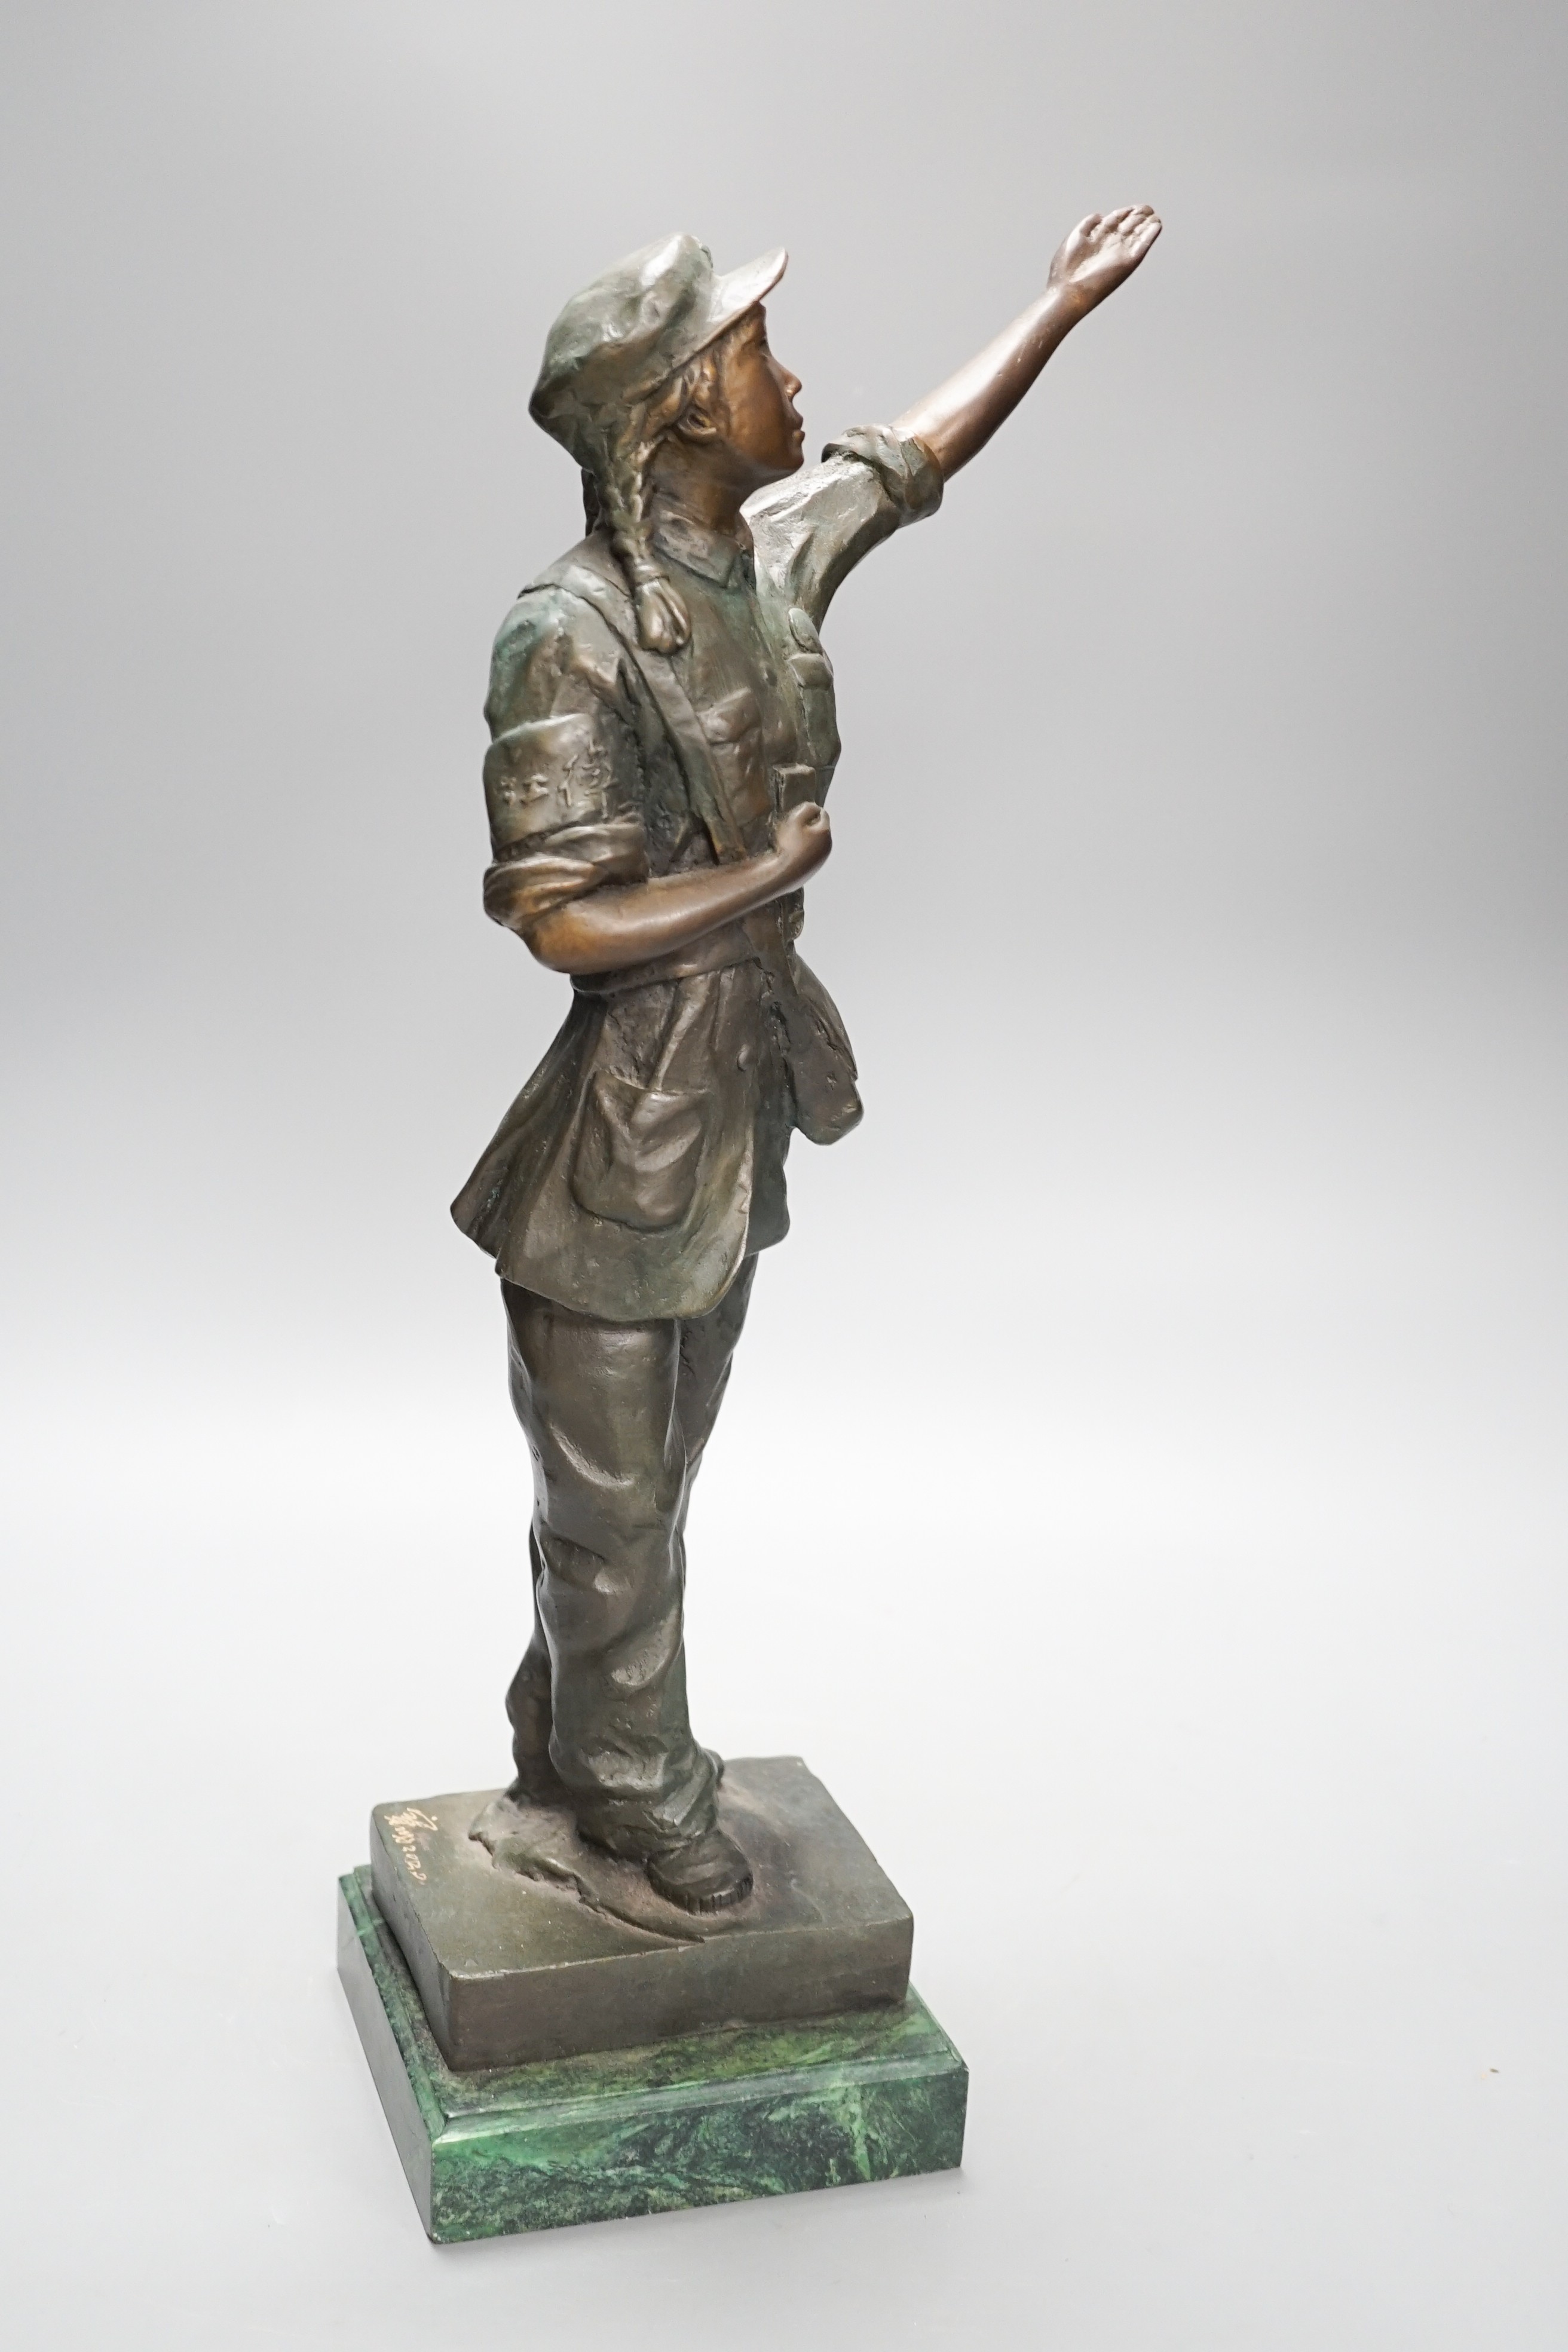 Le Bao bronze figure, a Red guard from Chinese revolutionary opera, 2020. 46cm